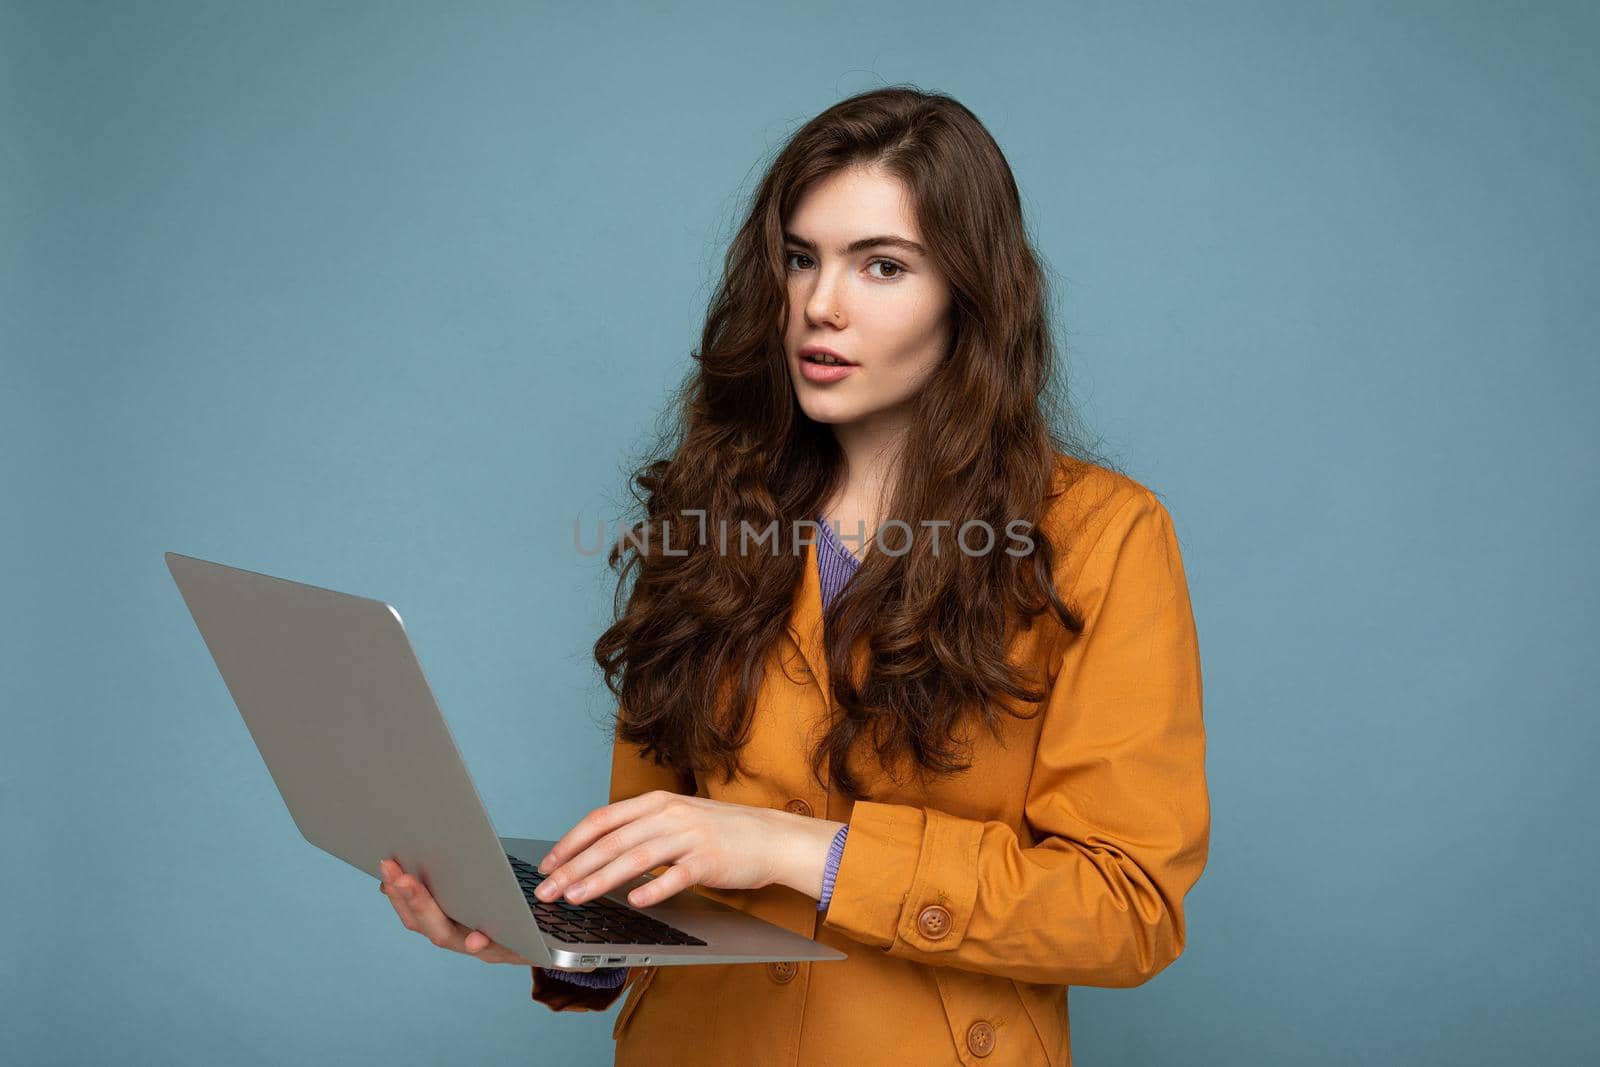 Close-up portrait of Beautiful calm brunet curly young woman holding netbook computer looking at camera wearing yellow jacket typing on keyboard isolated on blue background.